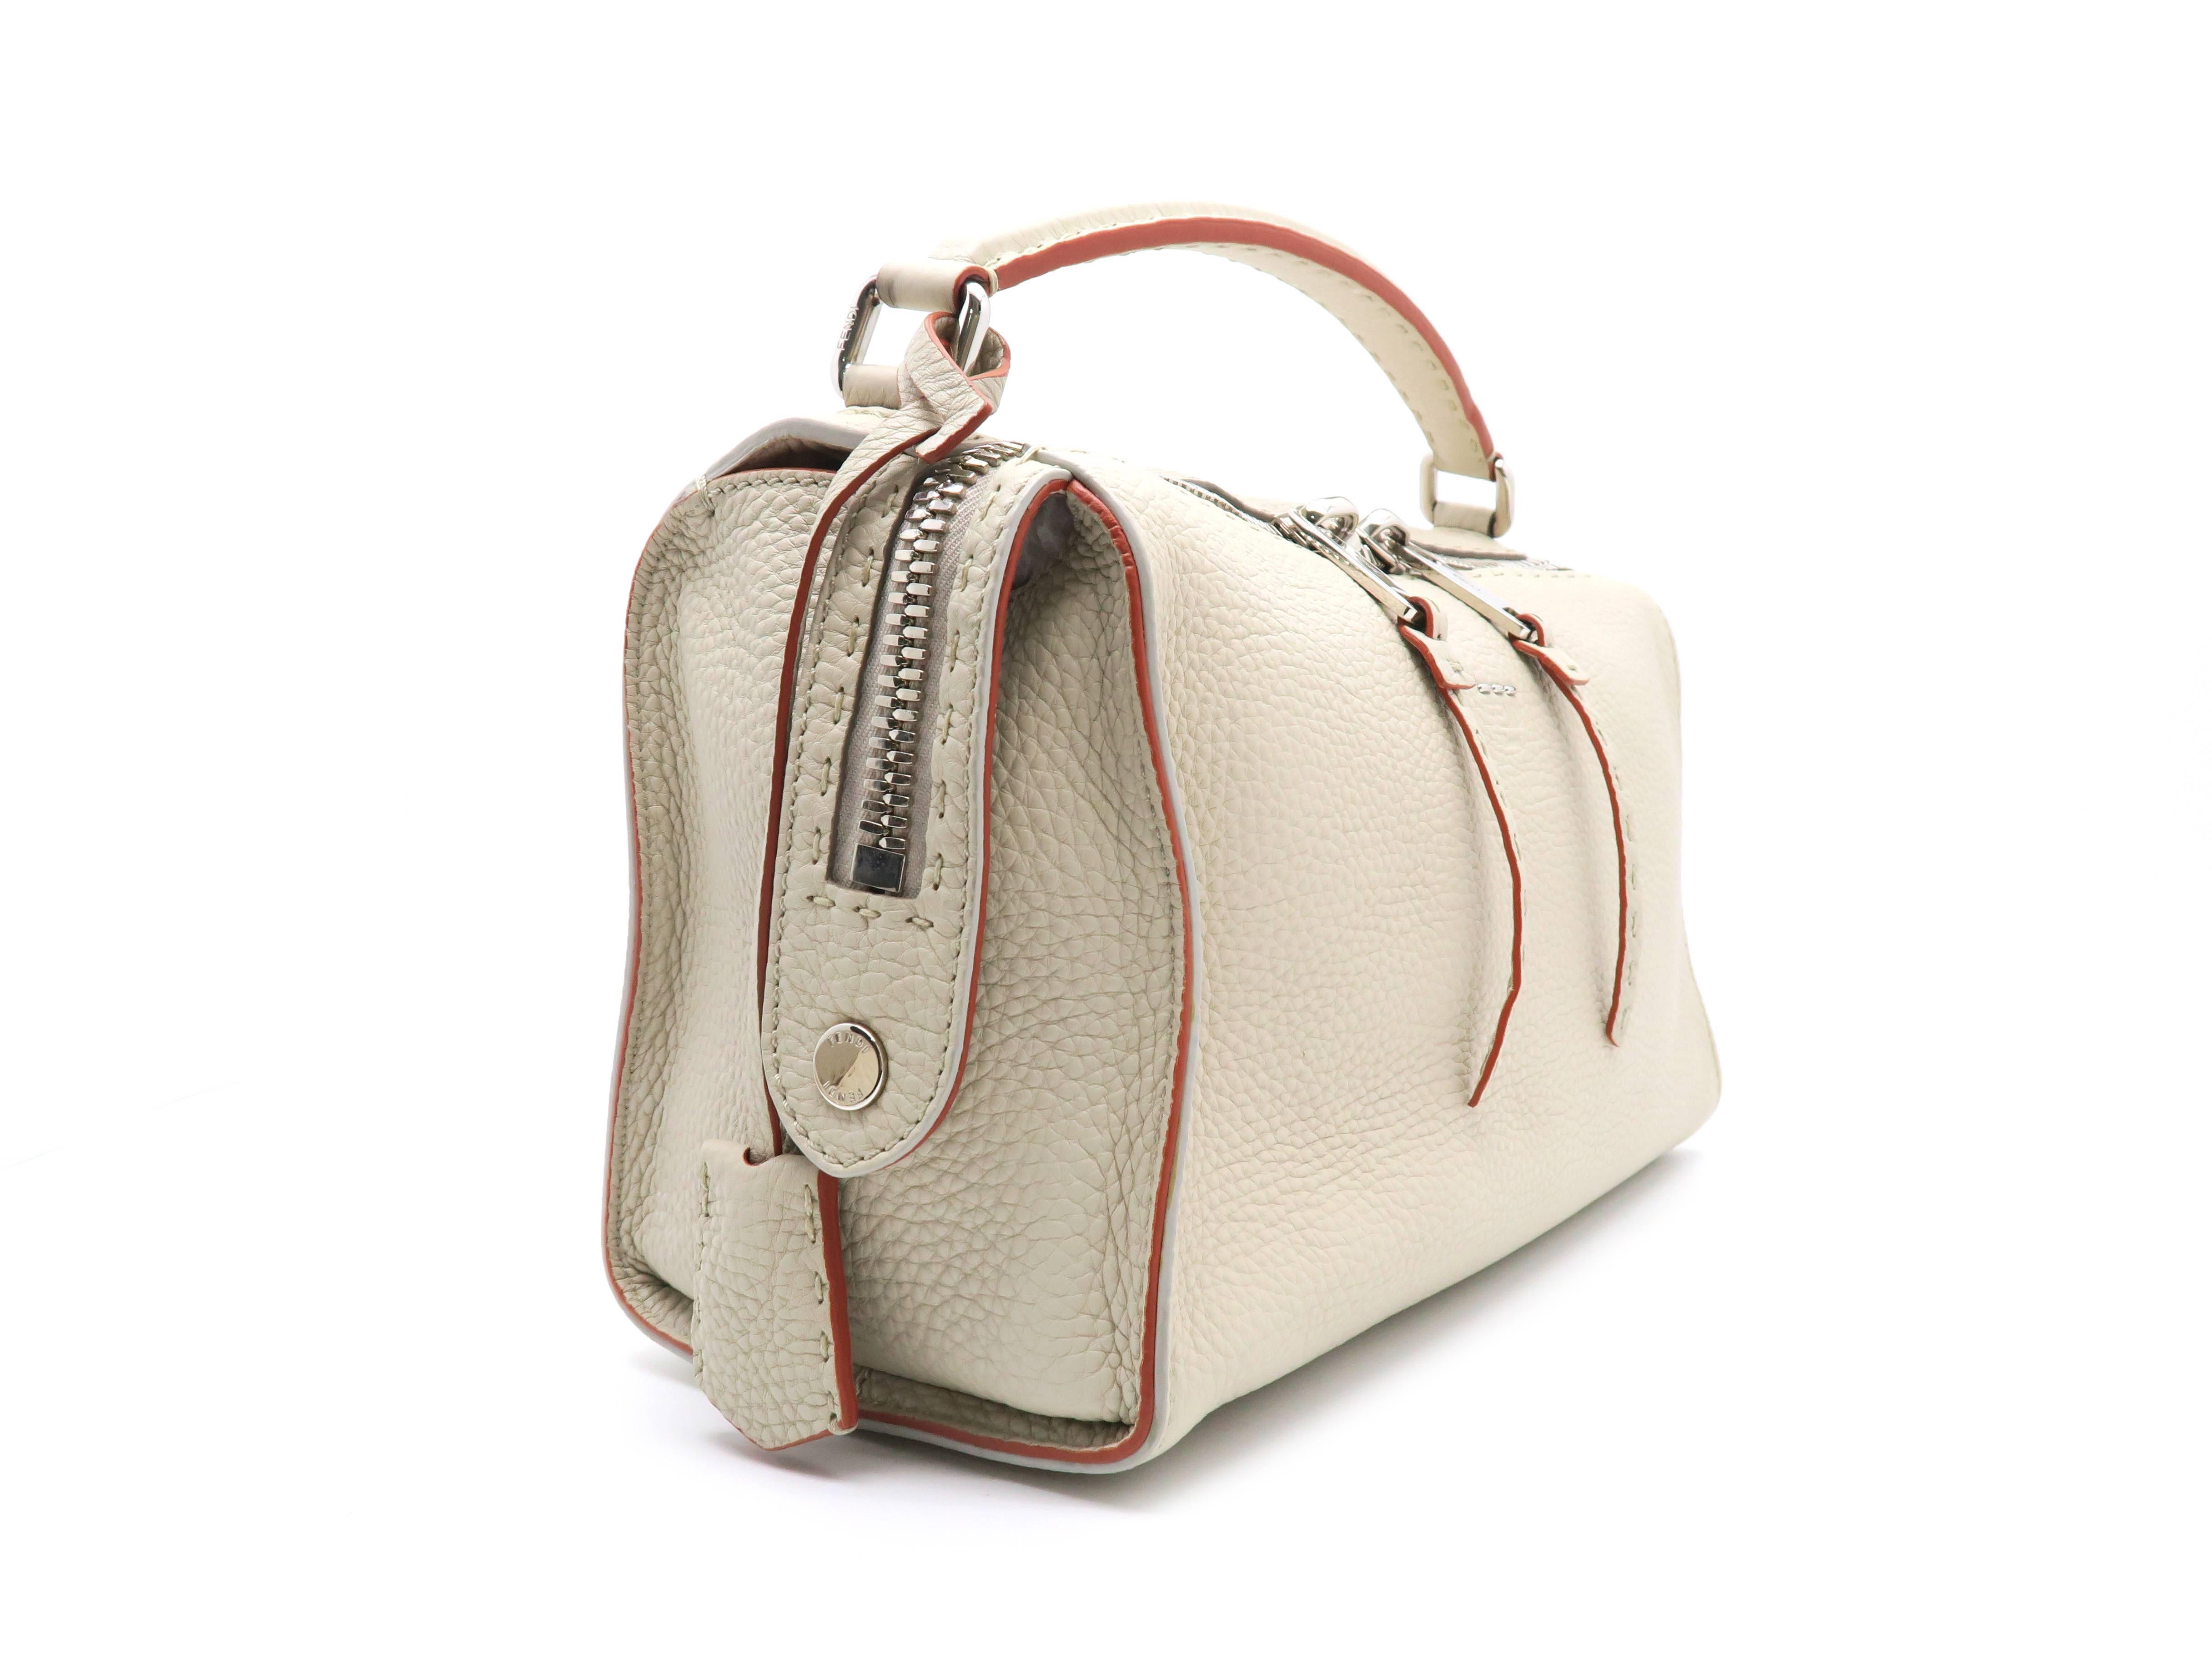 Color: Beige

Material: Calfskin Leather

Condition: Rank  A
Overall: Good, few minor defects
Surface: Minor Scratches
Corners: Minor Scratches
Edges: Minor Scratches
Handles/Straps: Minor Scratches
Hardware: Minor Scratches

Dimension: W29.5 × H16